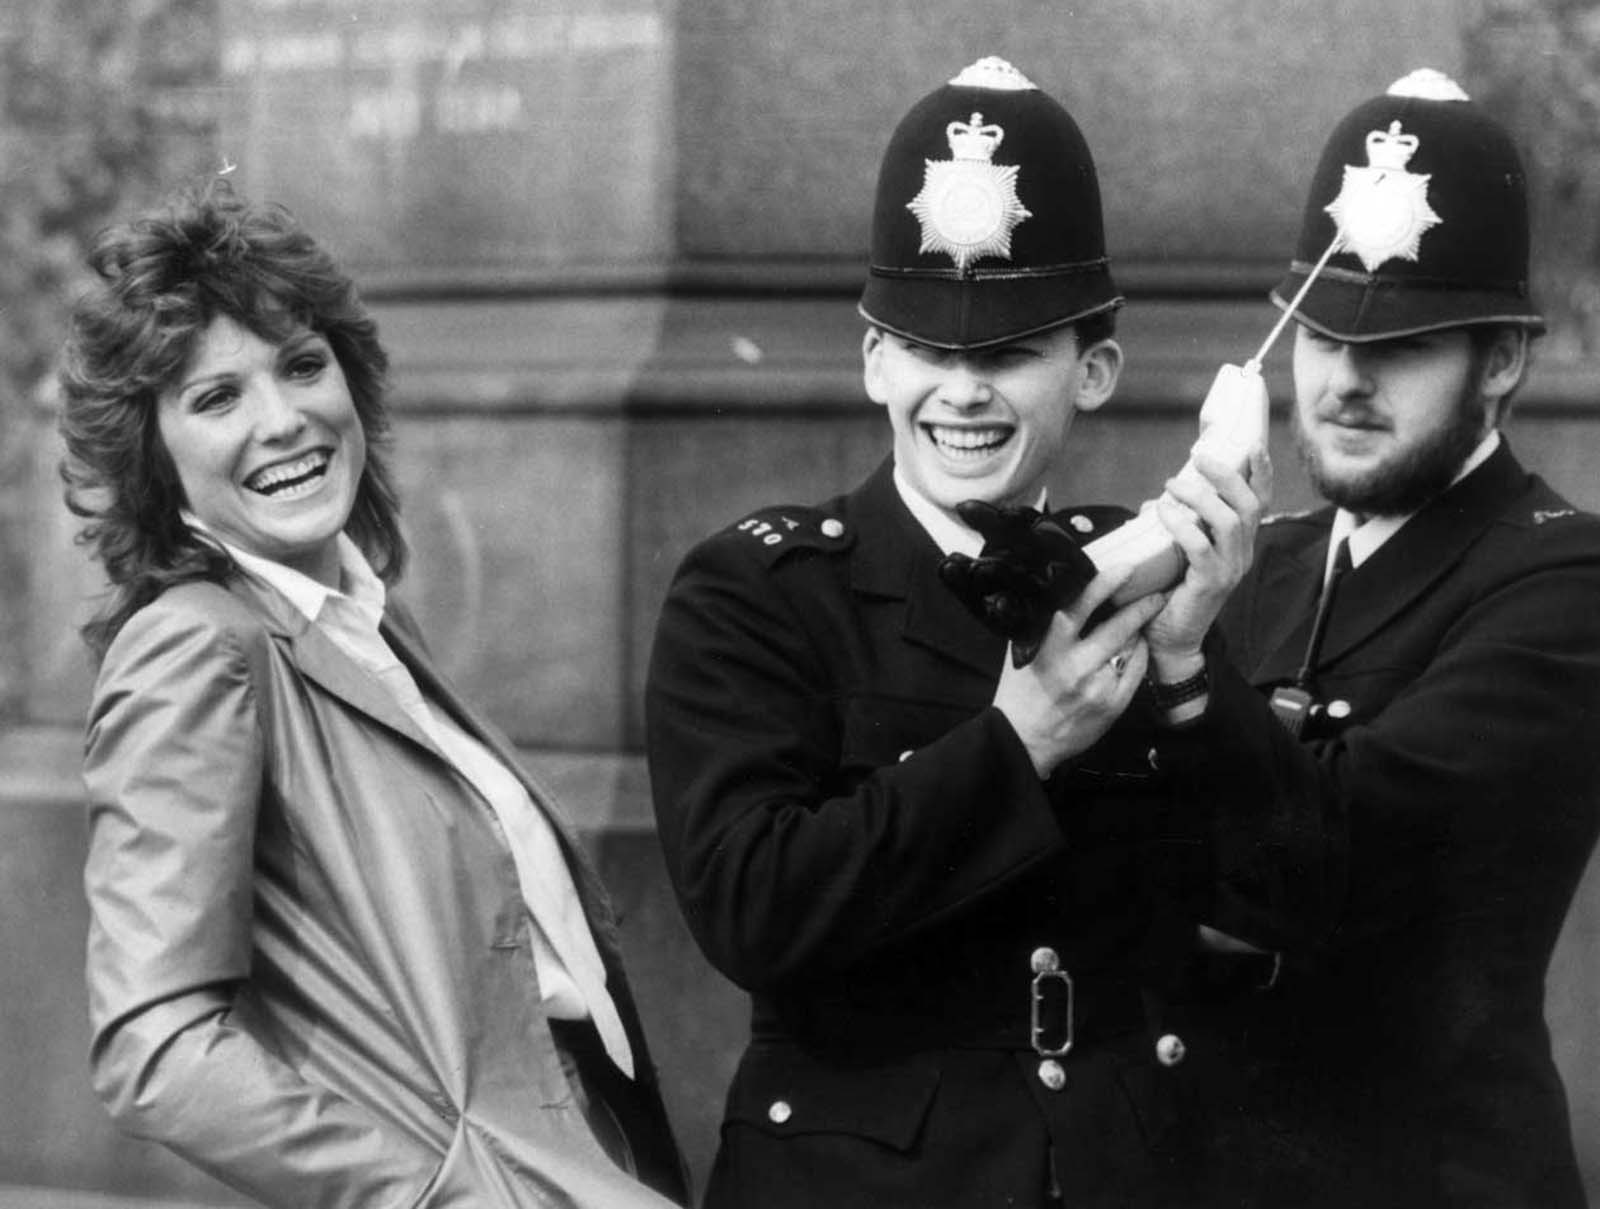 British actress Suzanne Danielle sharing a joke with two policemen while they examine one of the then-newly legal mobile phones in the United Kingdom. 1983.